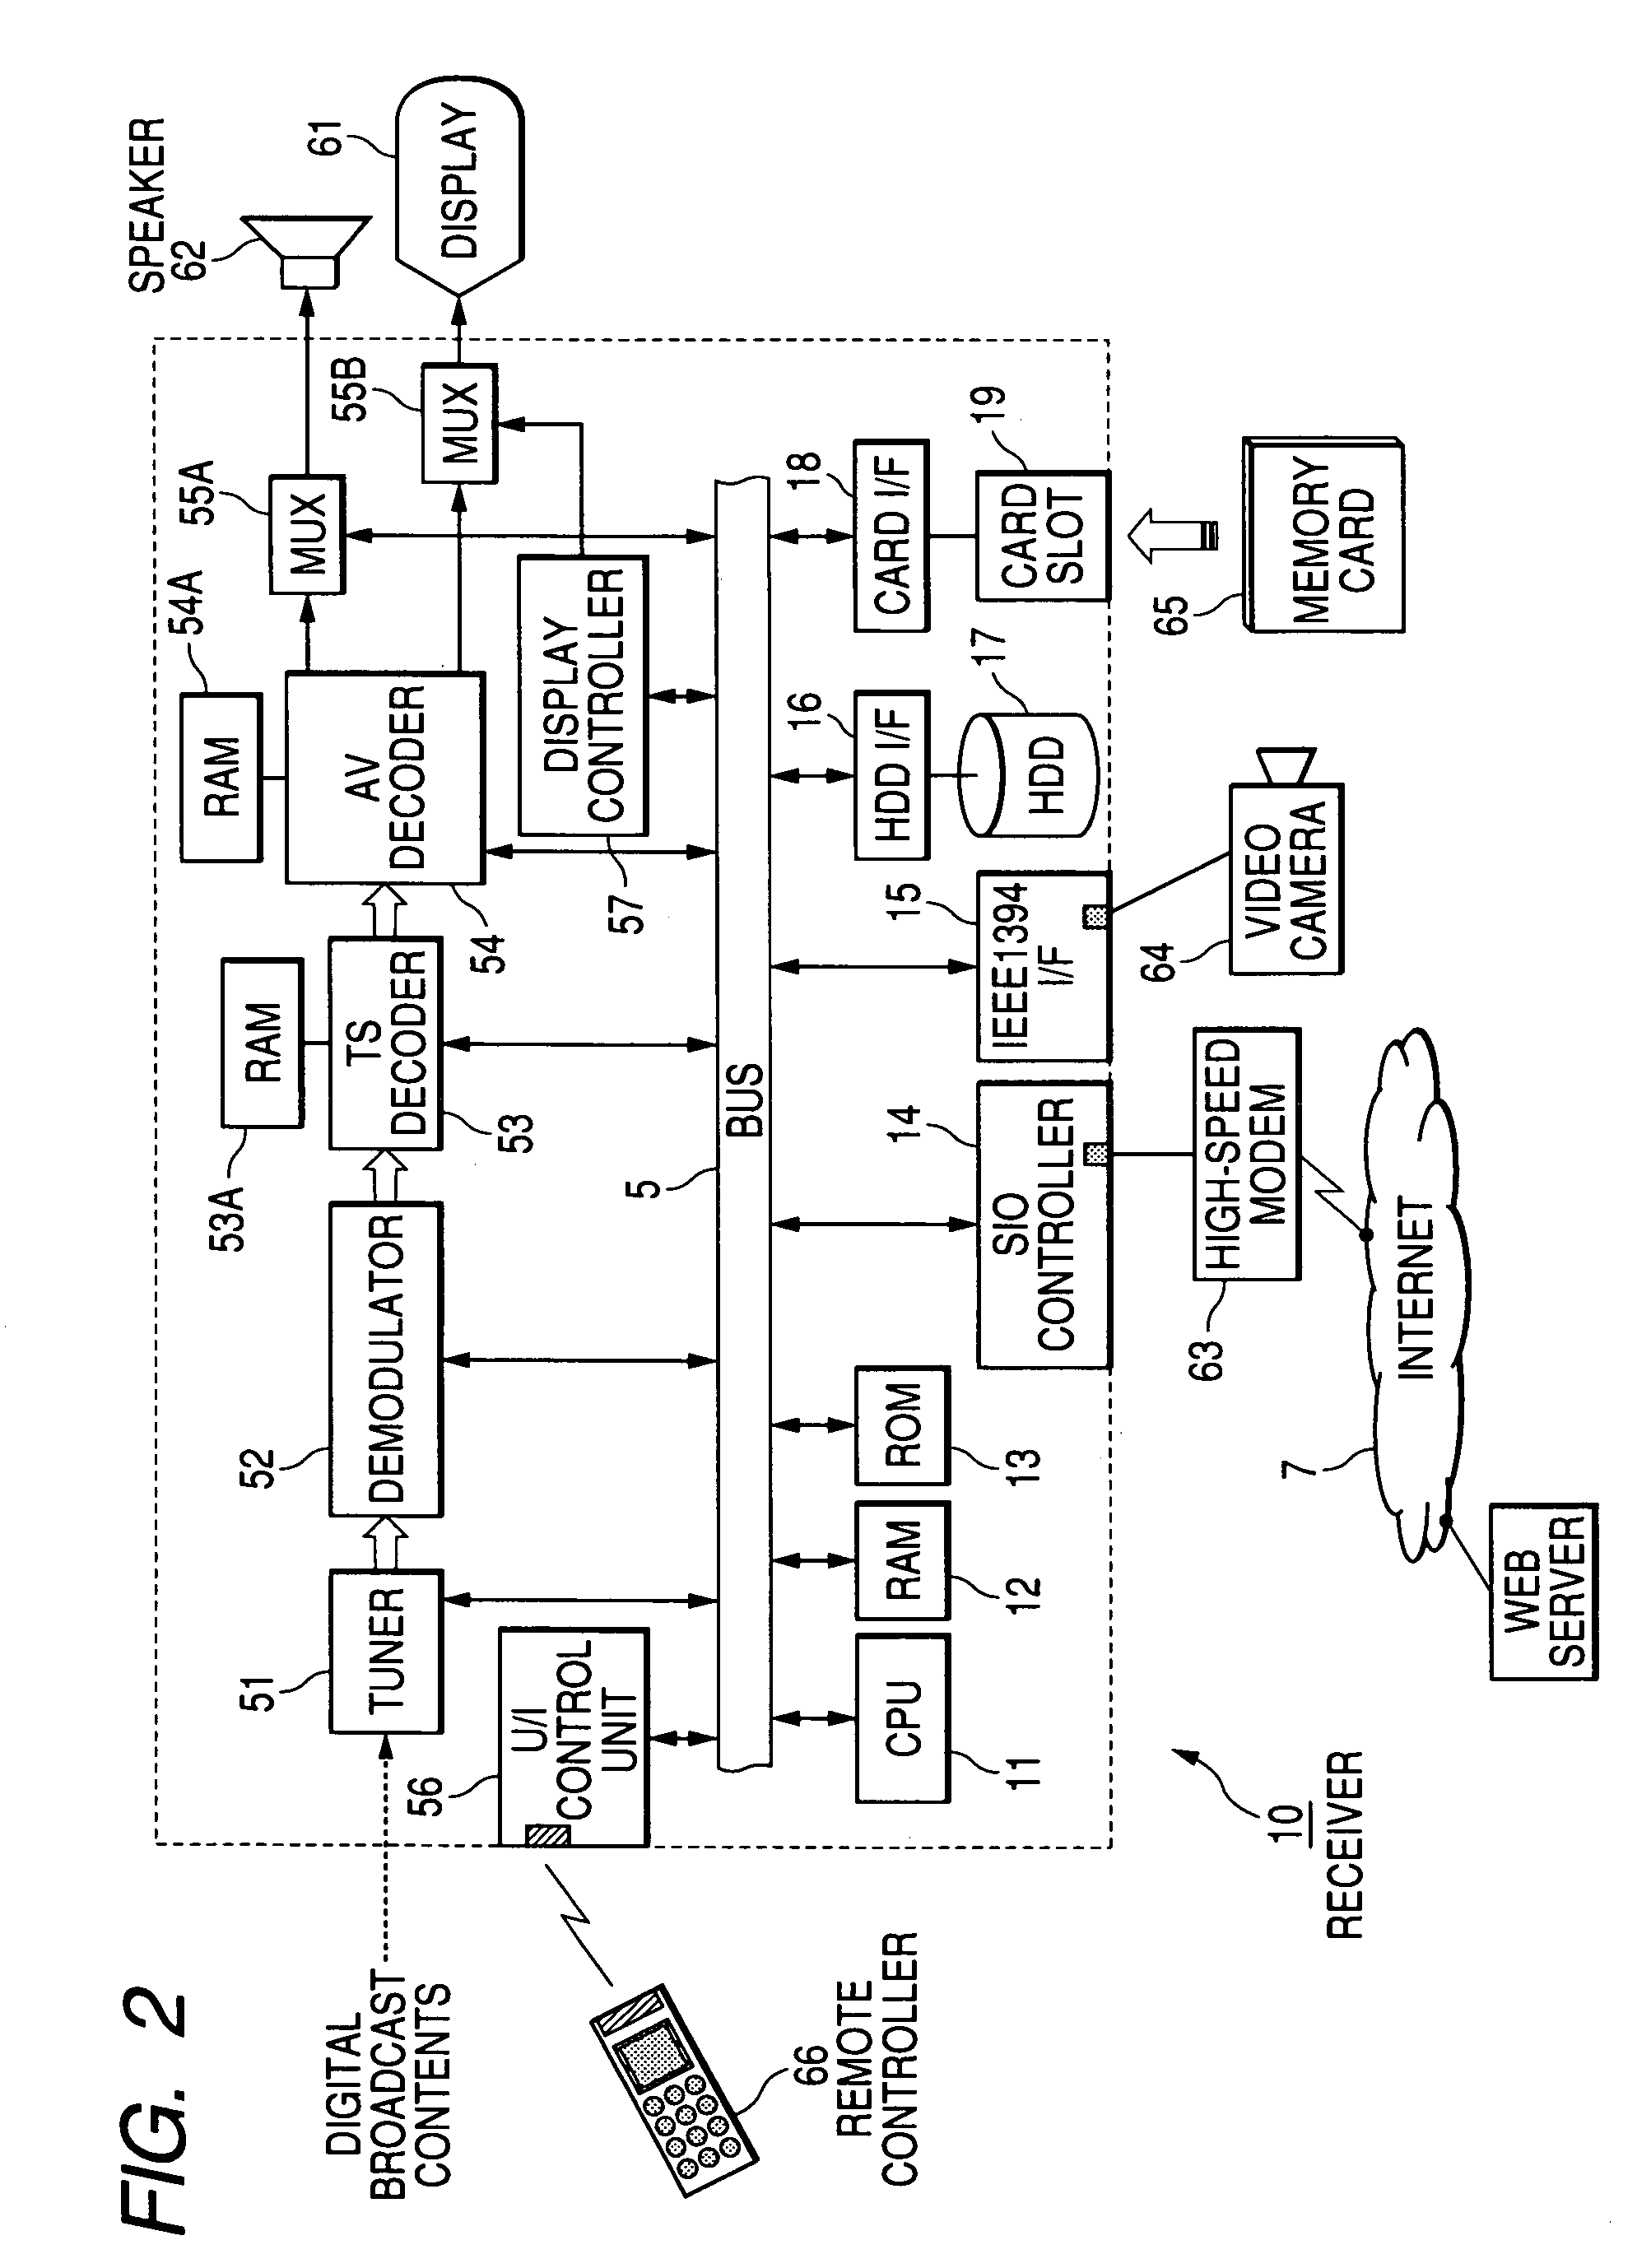 Content delivery system, content delivery apparatus, content recording and reproduction apparatus and content recording and reproduction method, and computer program